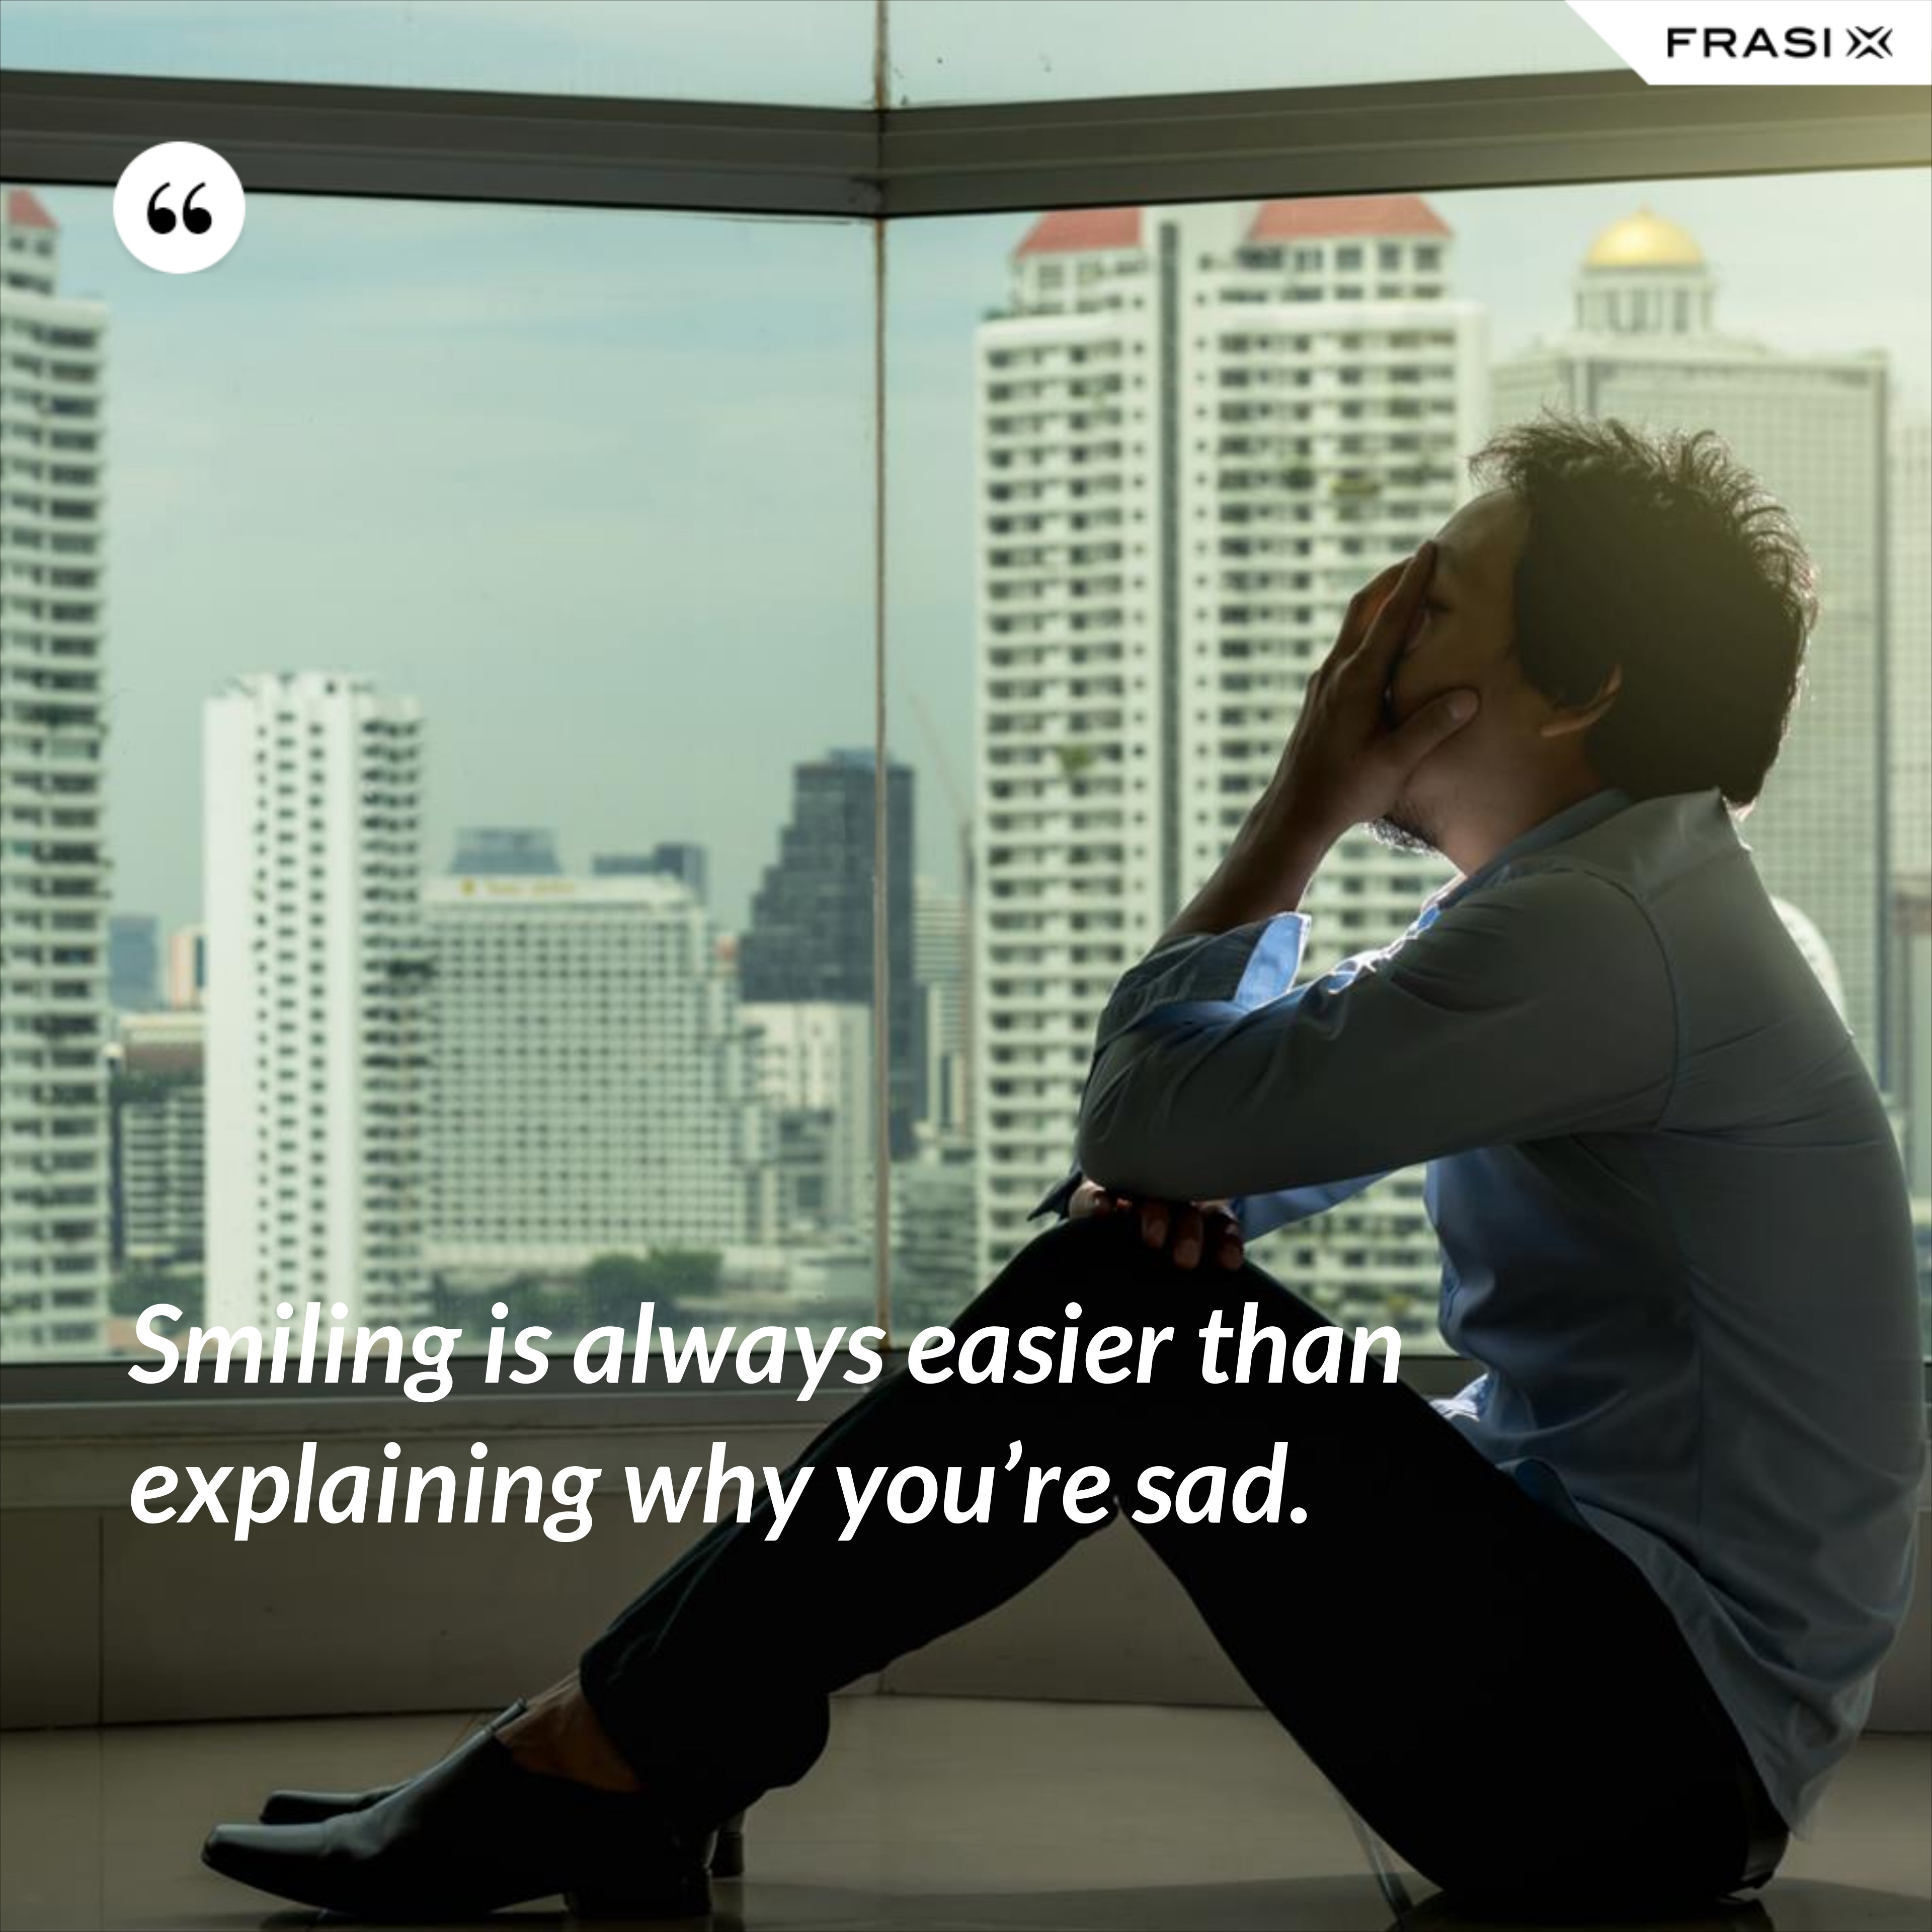 Smiling is always easier than explaining why you’re sad. - Anonimo